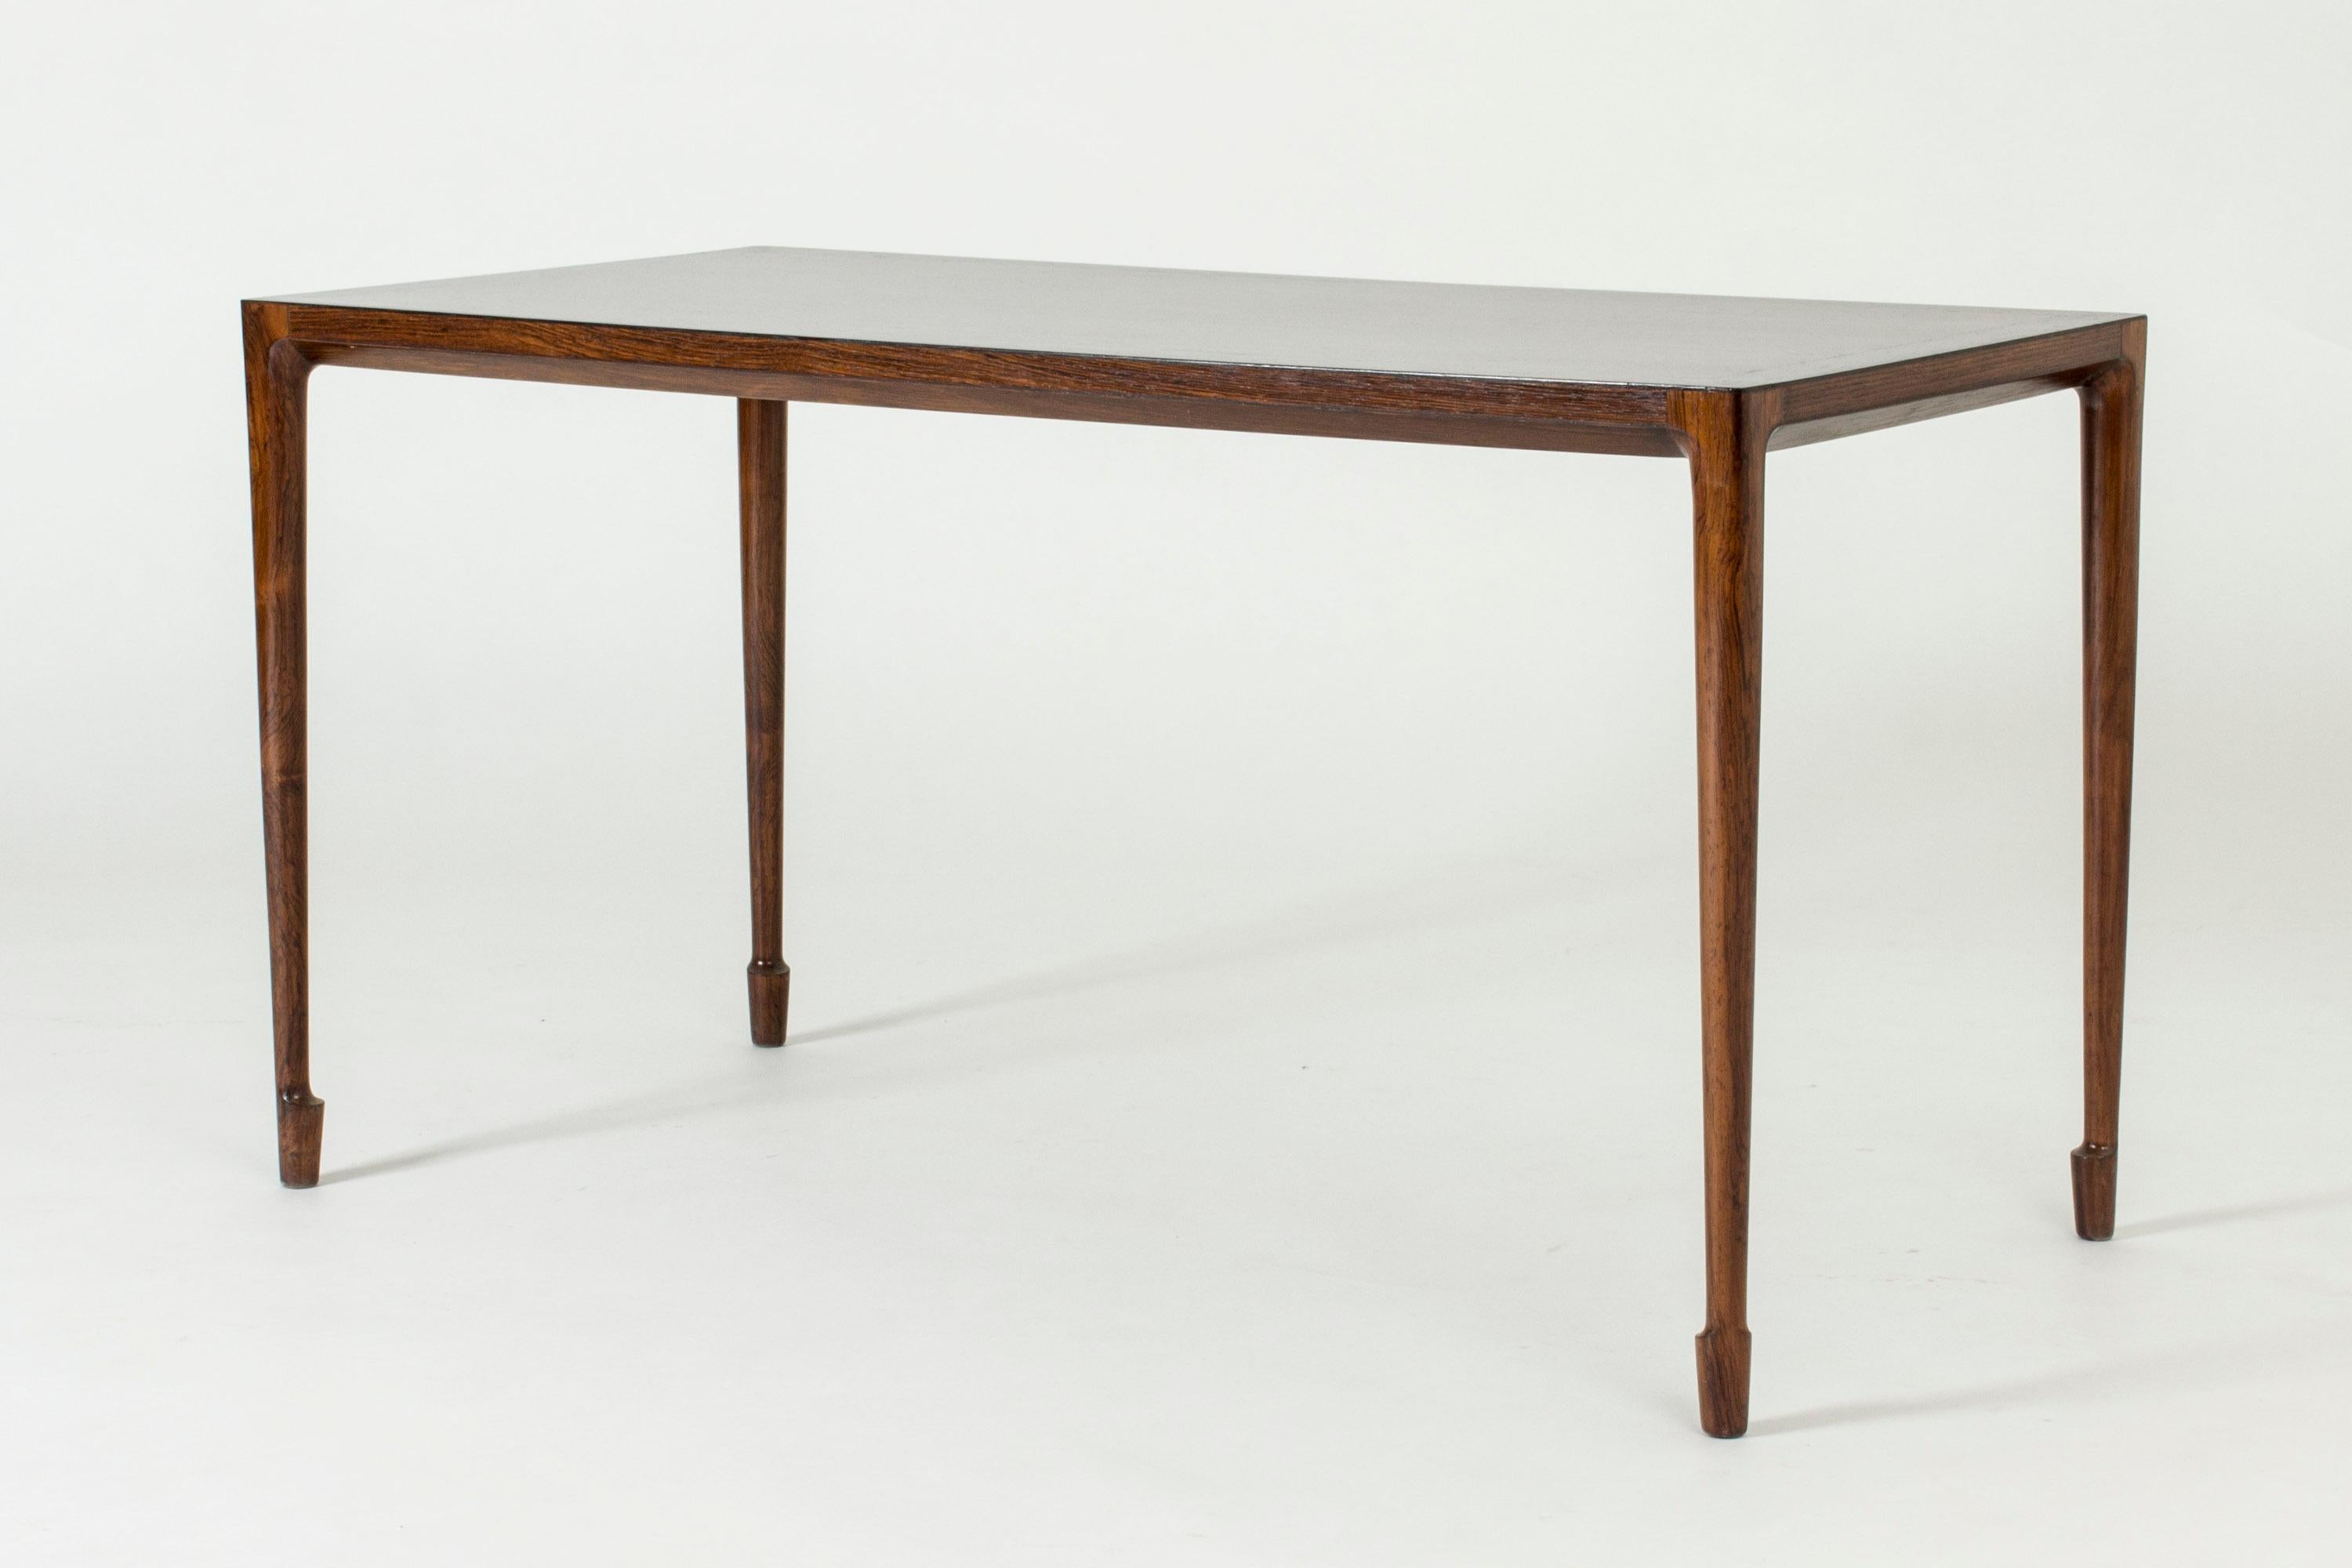 Elegant rosewood coffee table by Bernt Petersen, with a smooth top. Amazing slender design with beautifully sculpted feet.